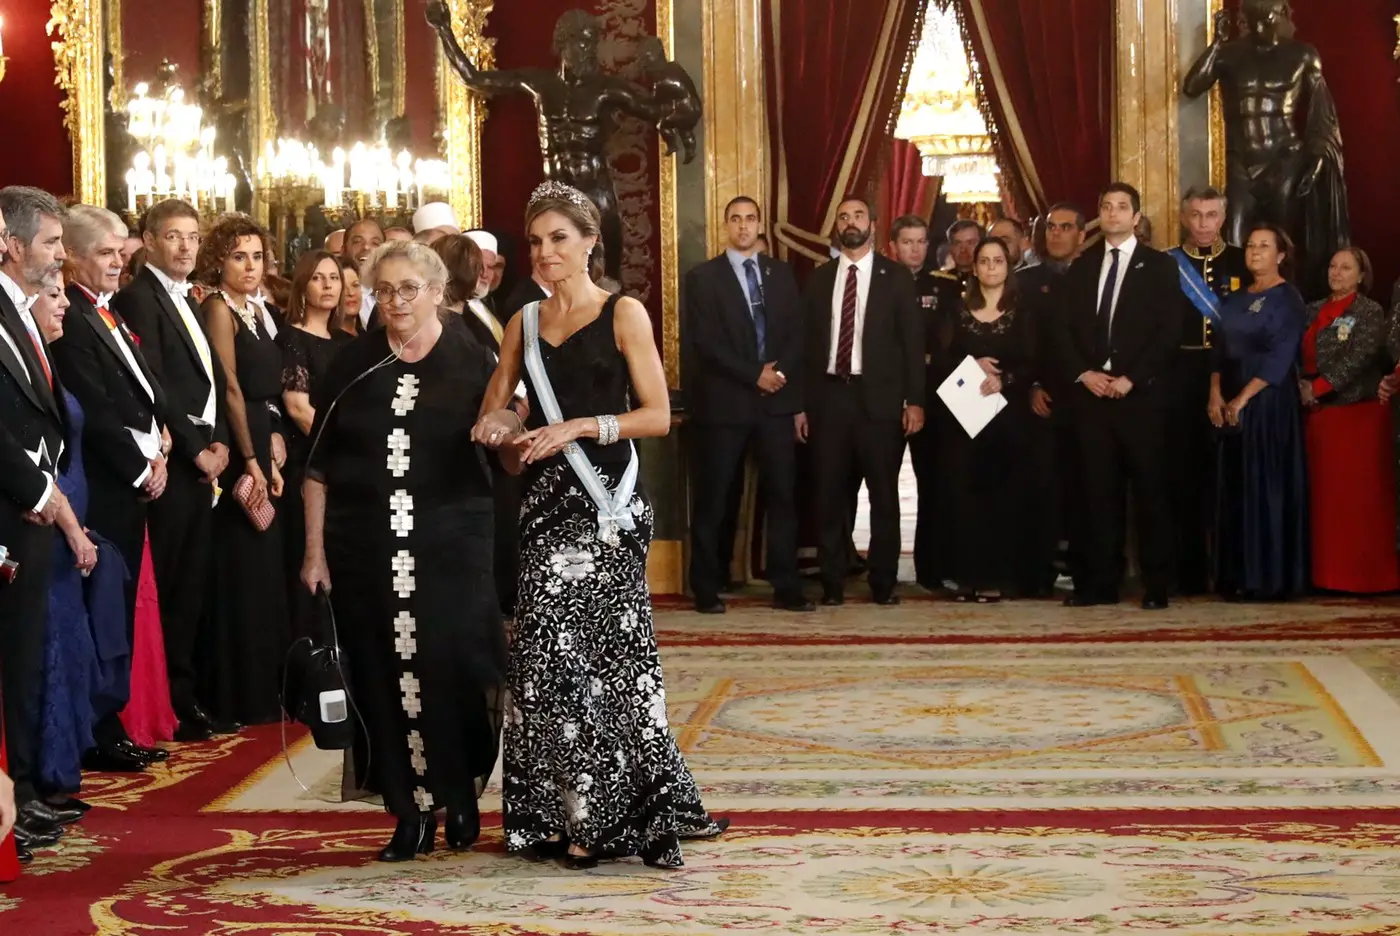 Queen Letizia brought wardrobe oldies back for Israel state dinner